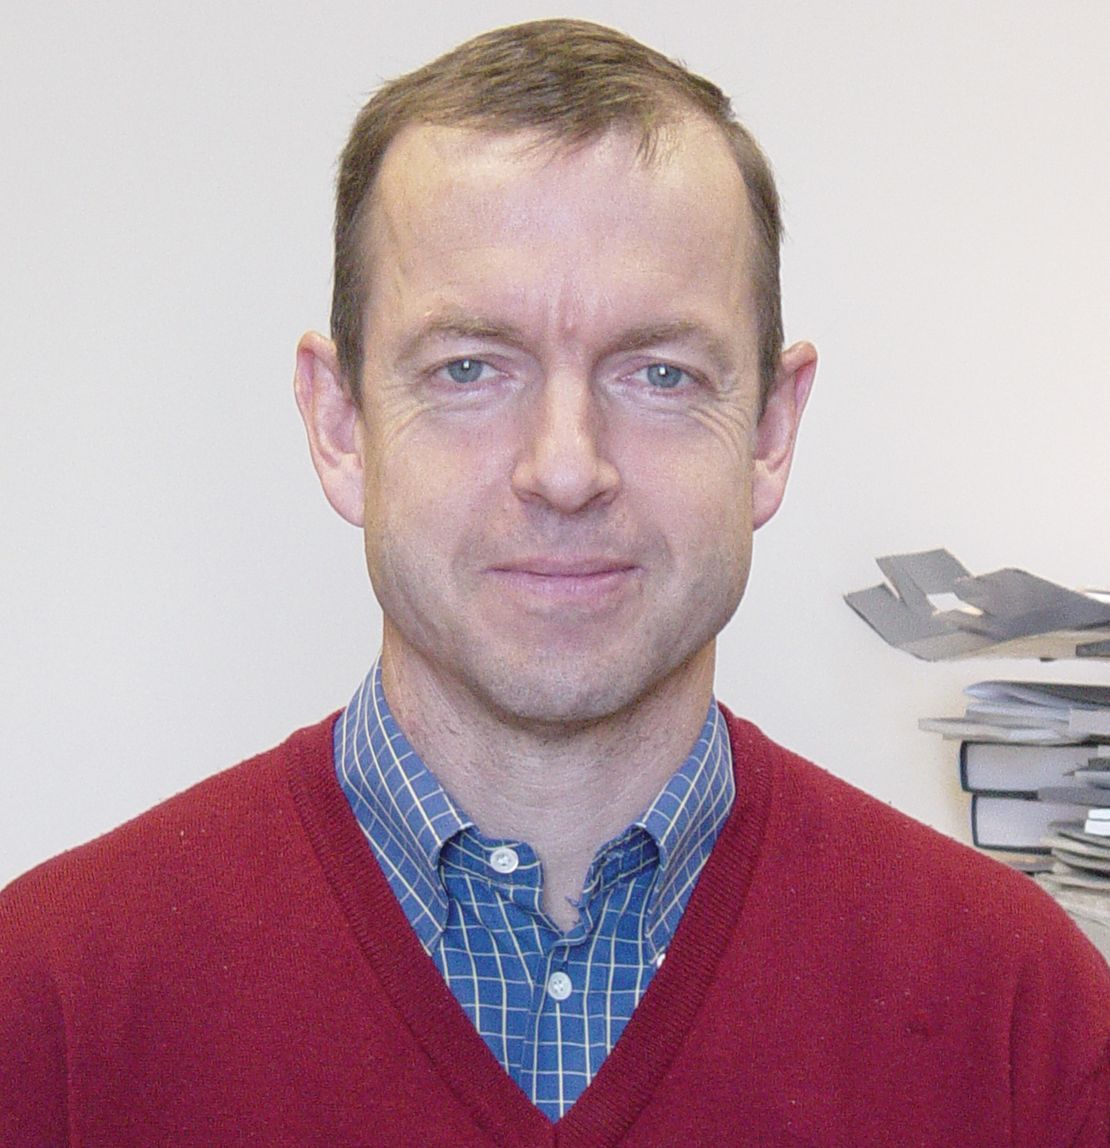 Daniel Gros, Director of the Centre for European Policy Studies